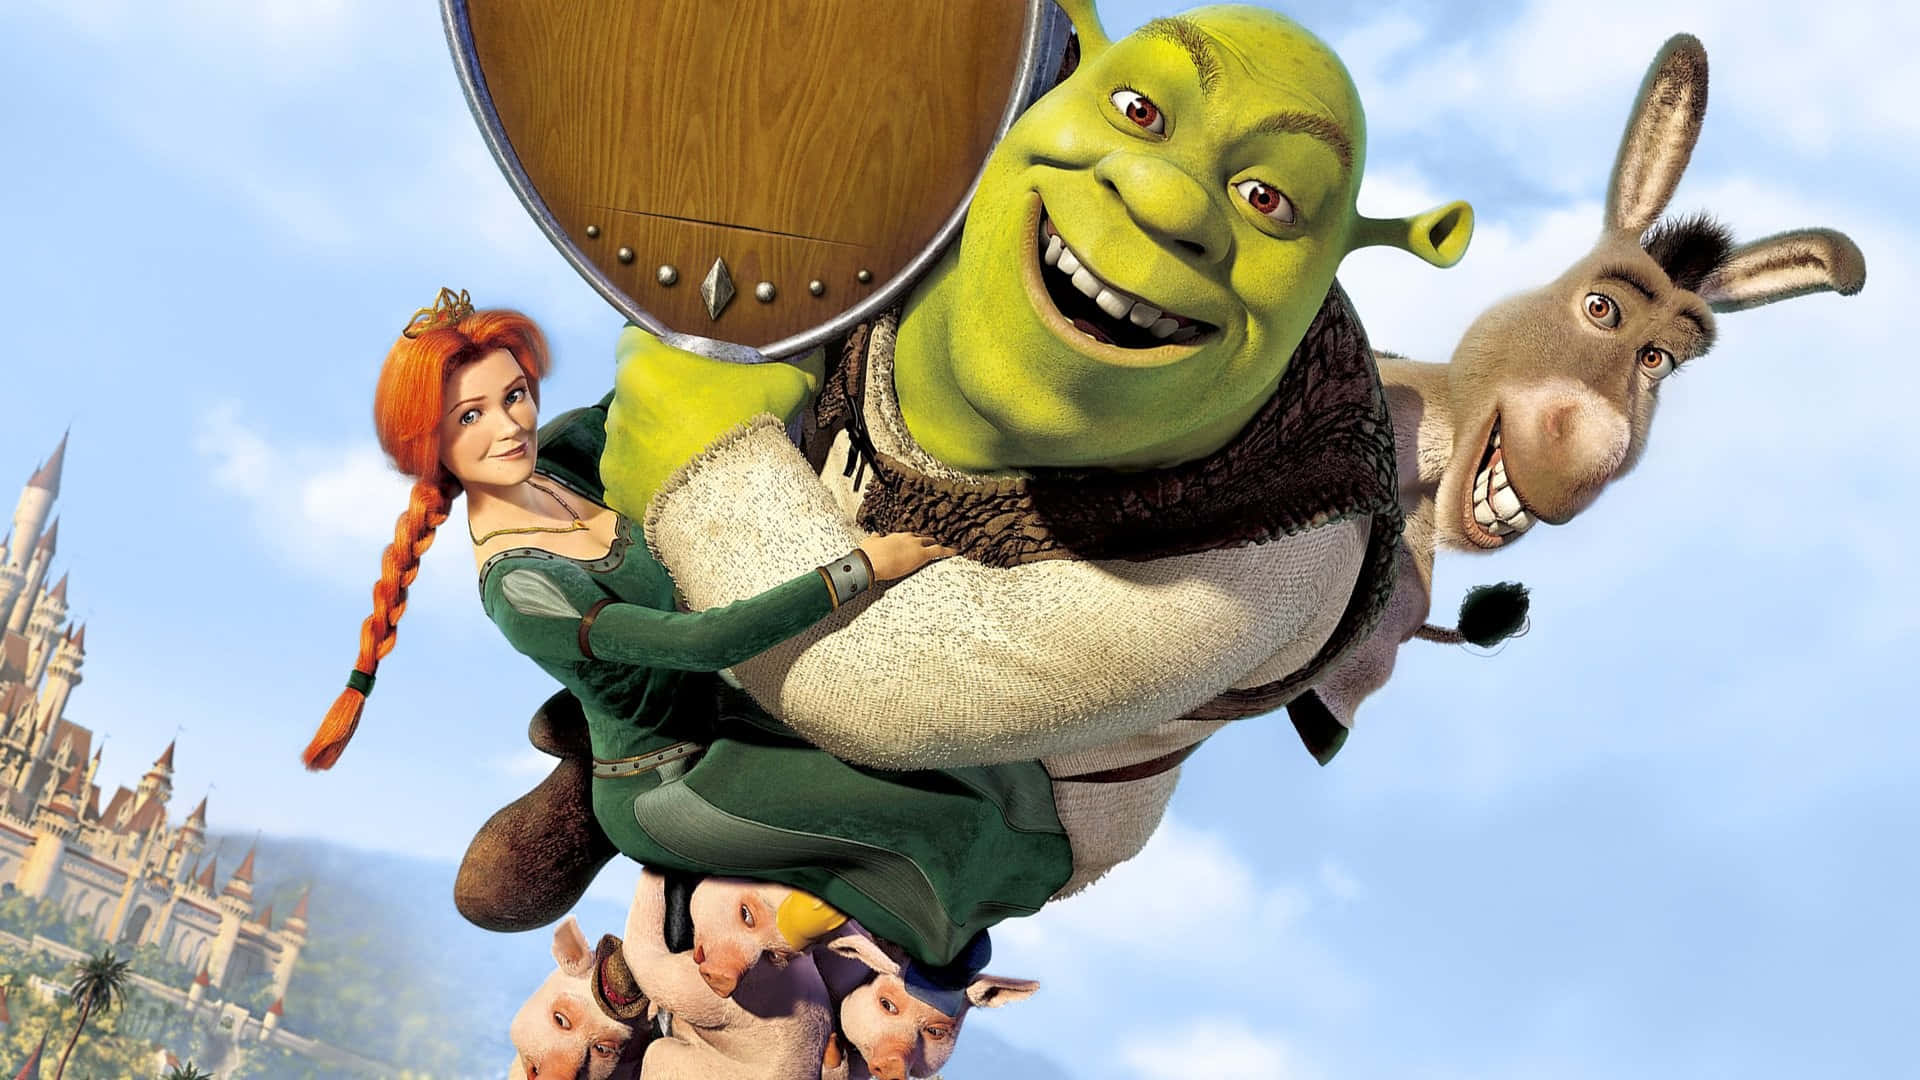 Let Loose And Have Some Fun With Shrek!